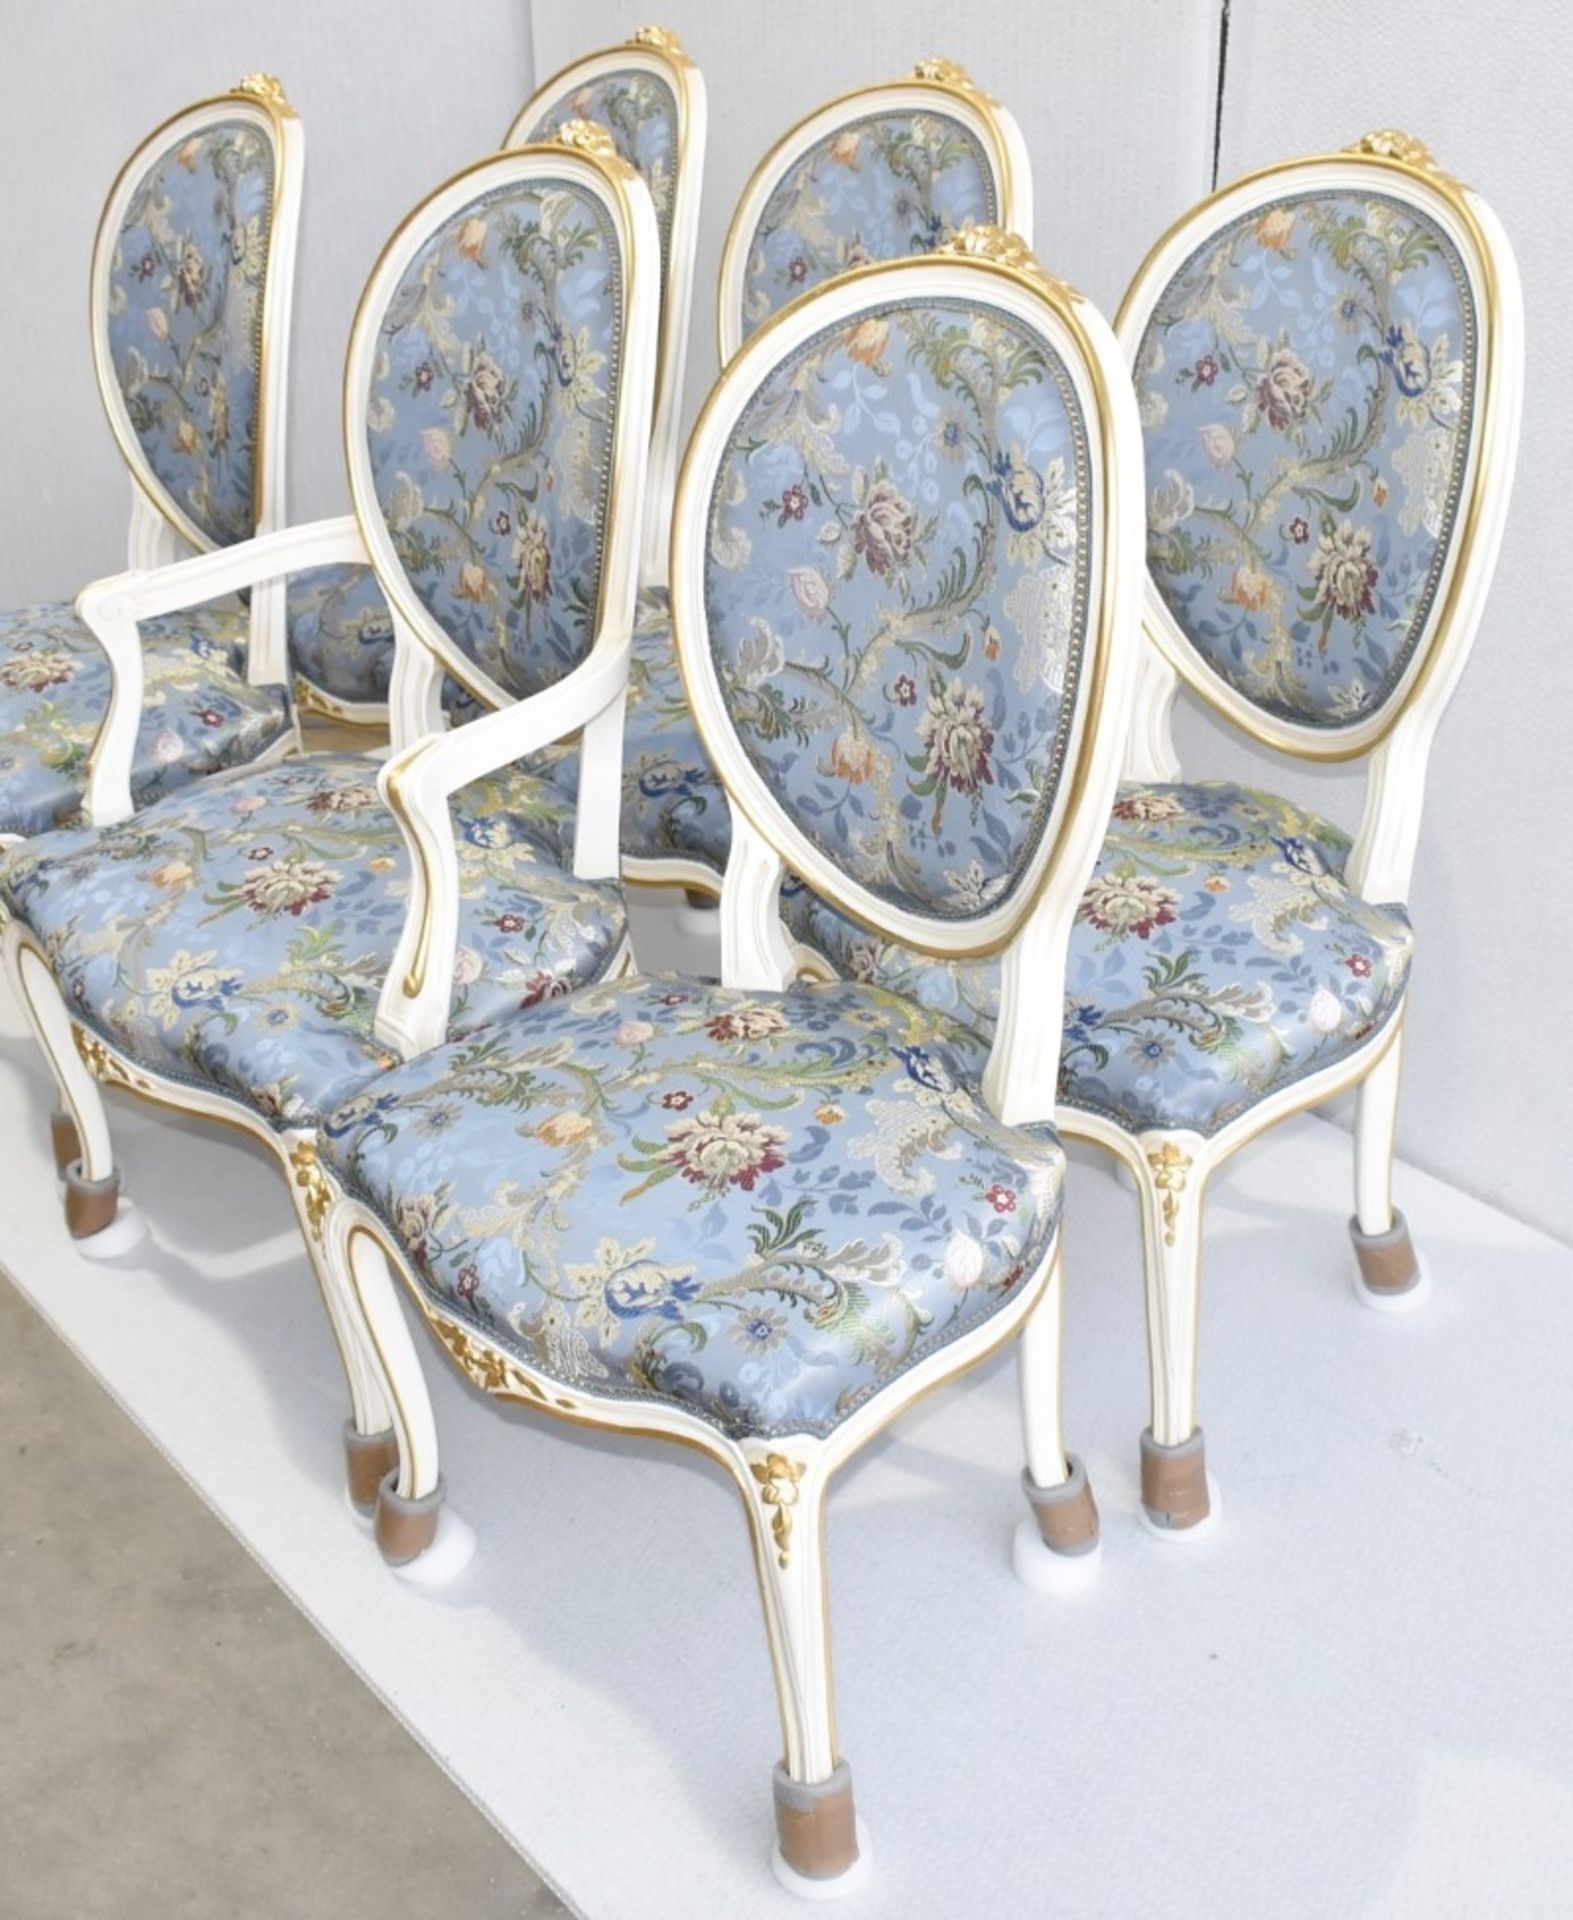 Set of 6 x ANGELO CAPPELLINI 'Timeless' Baroque-style Carved Dining Chairs, Floral Upholstered - Image 3 of 14